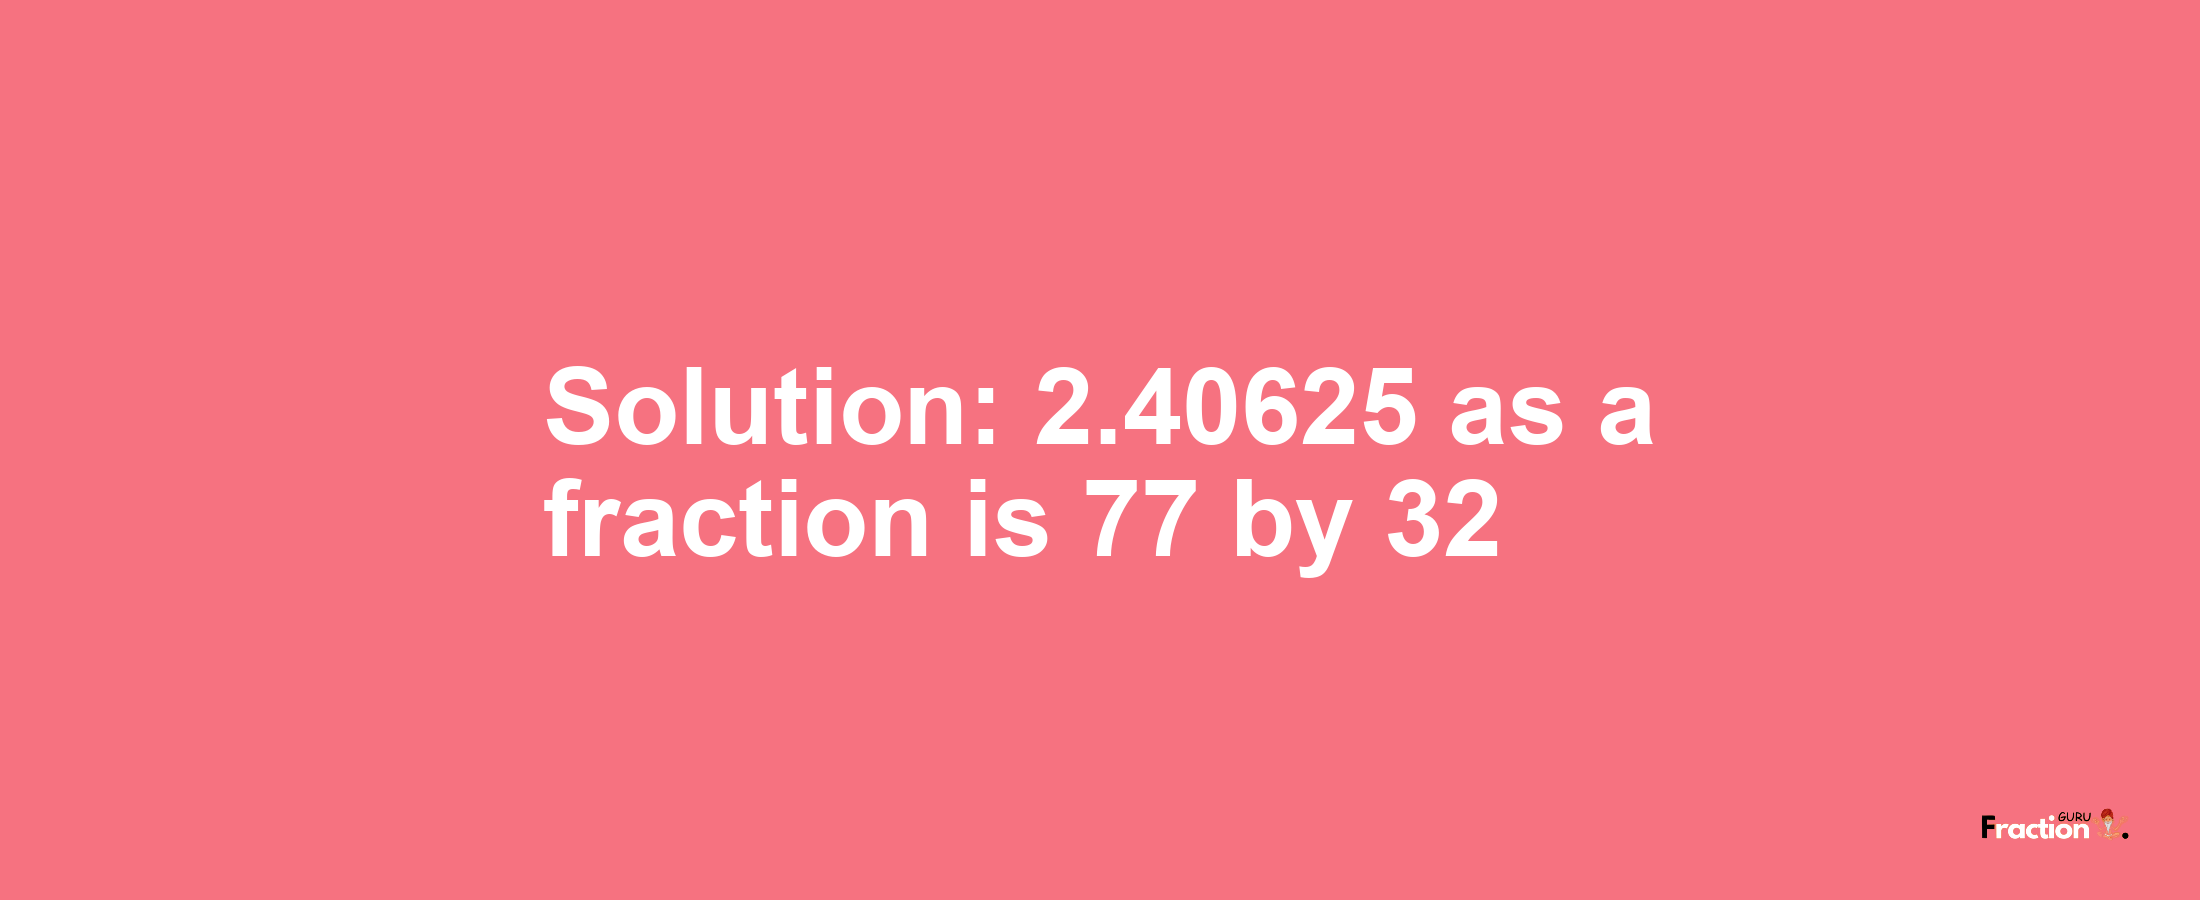 Solution:2.40625 as a fraction is 77/32